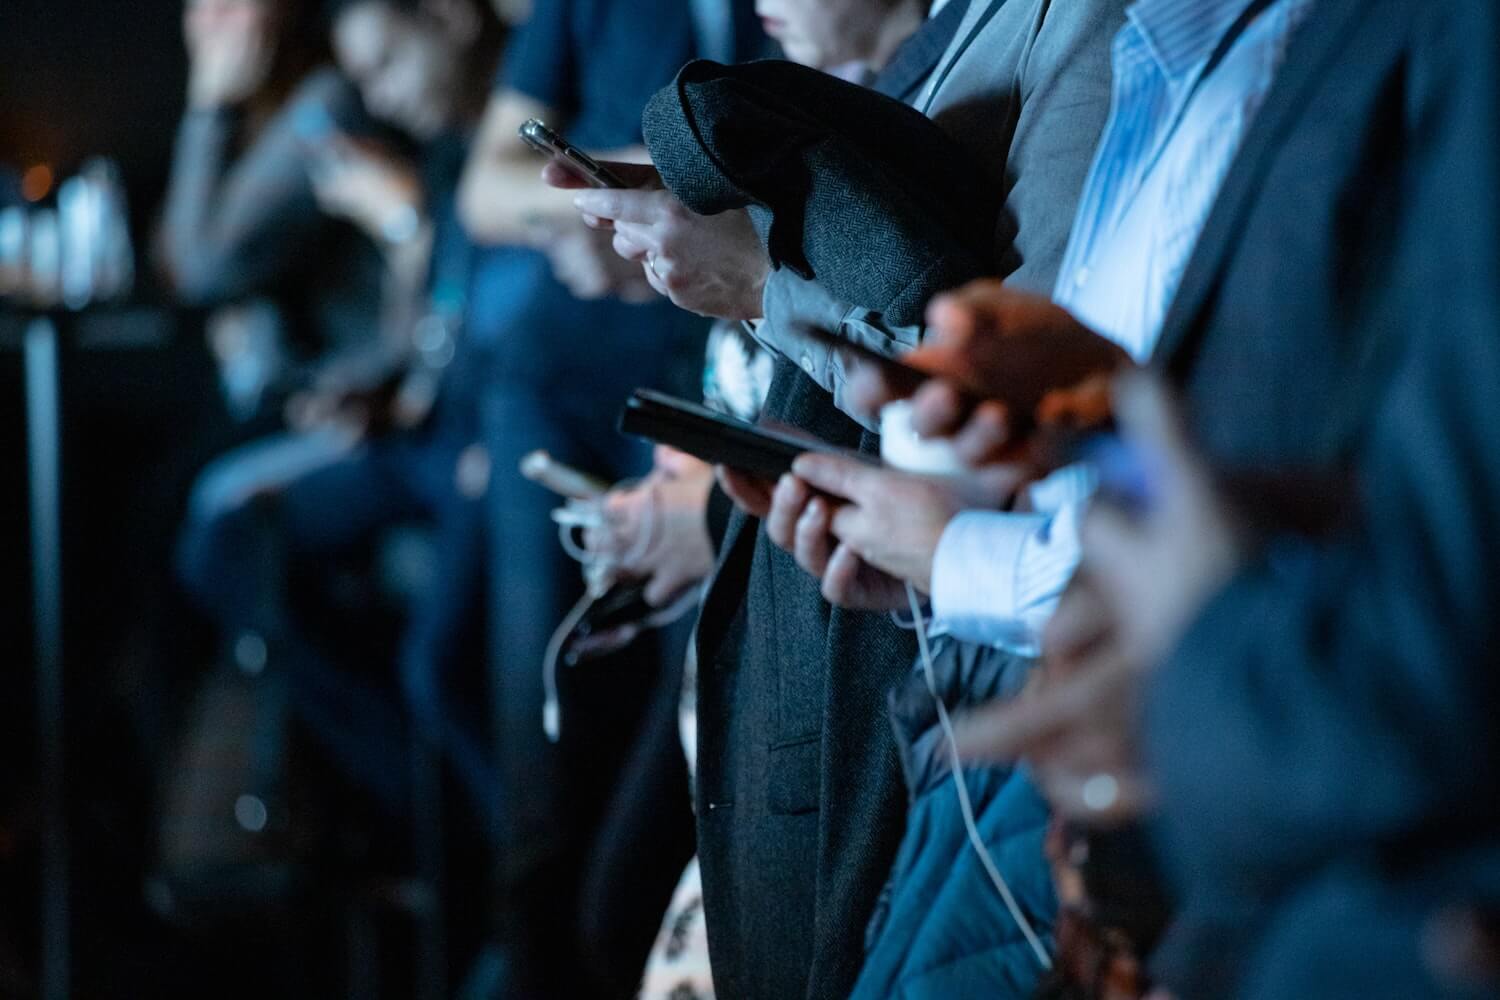 A line of men wearing suits and holding smartphones.